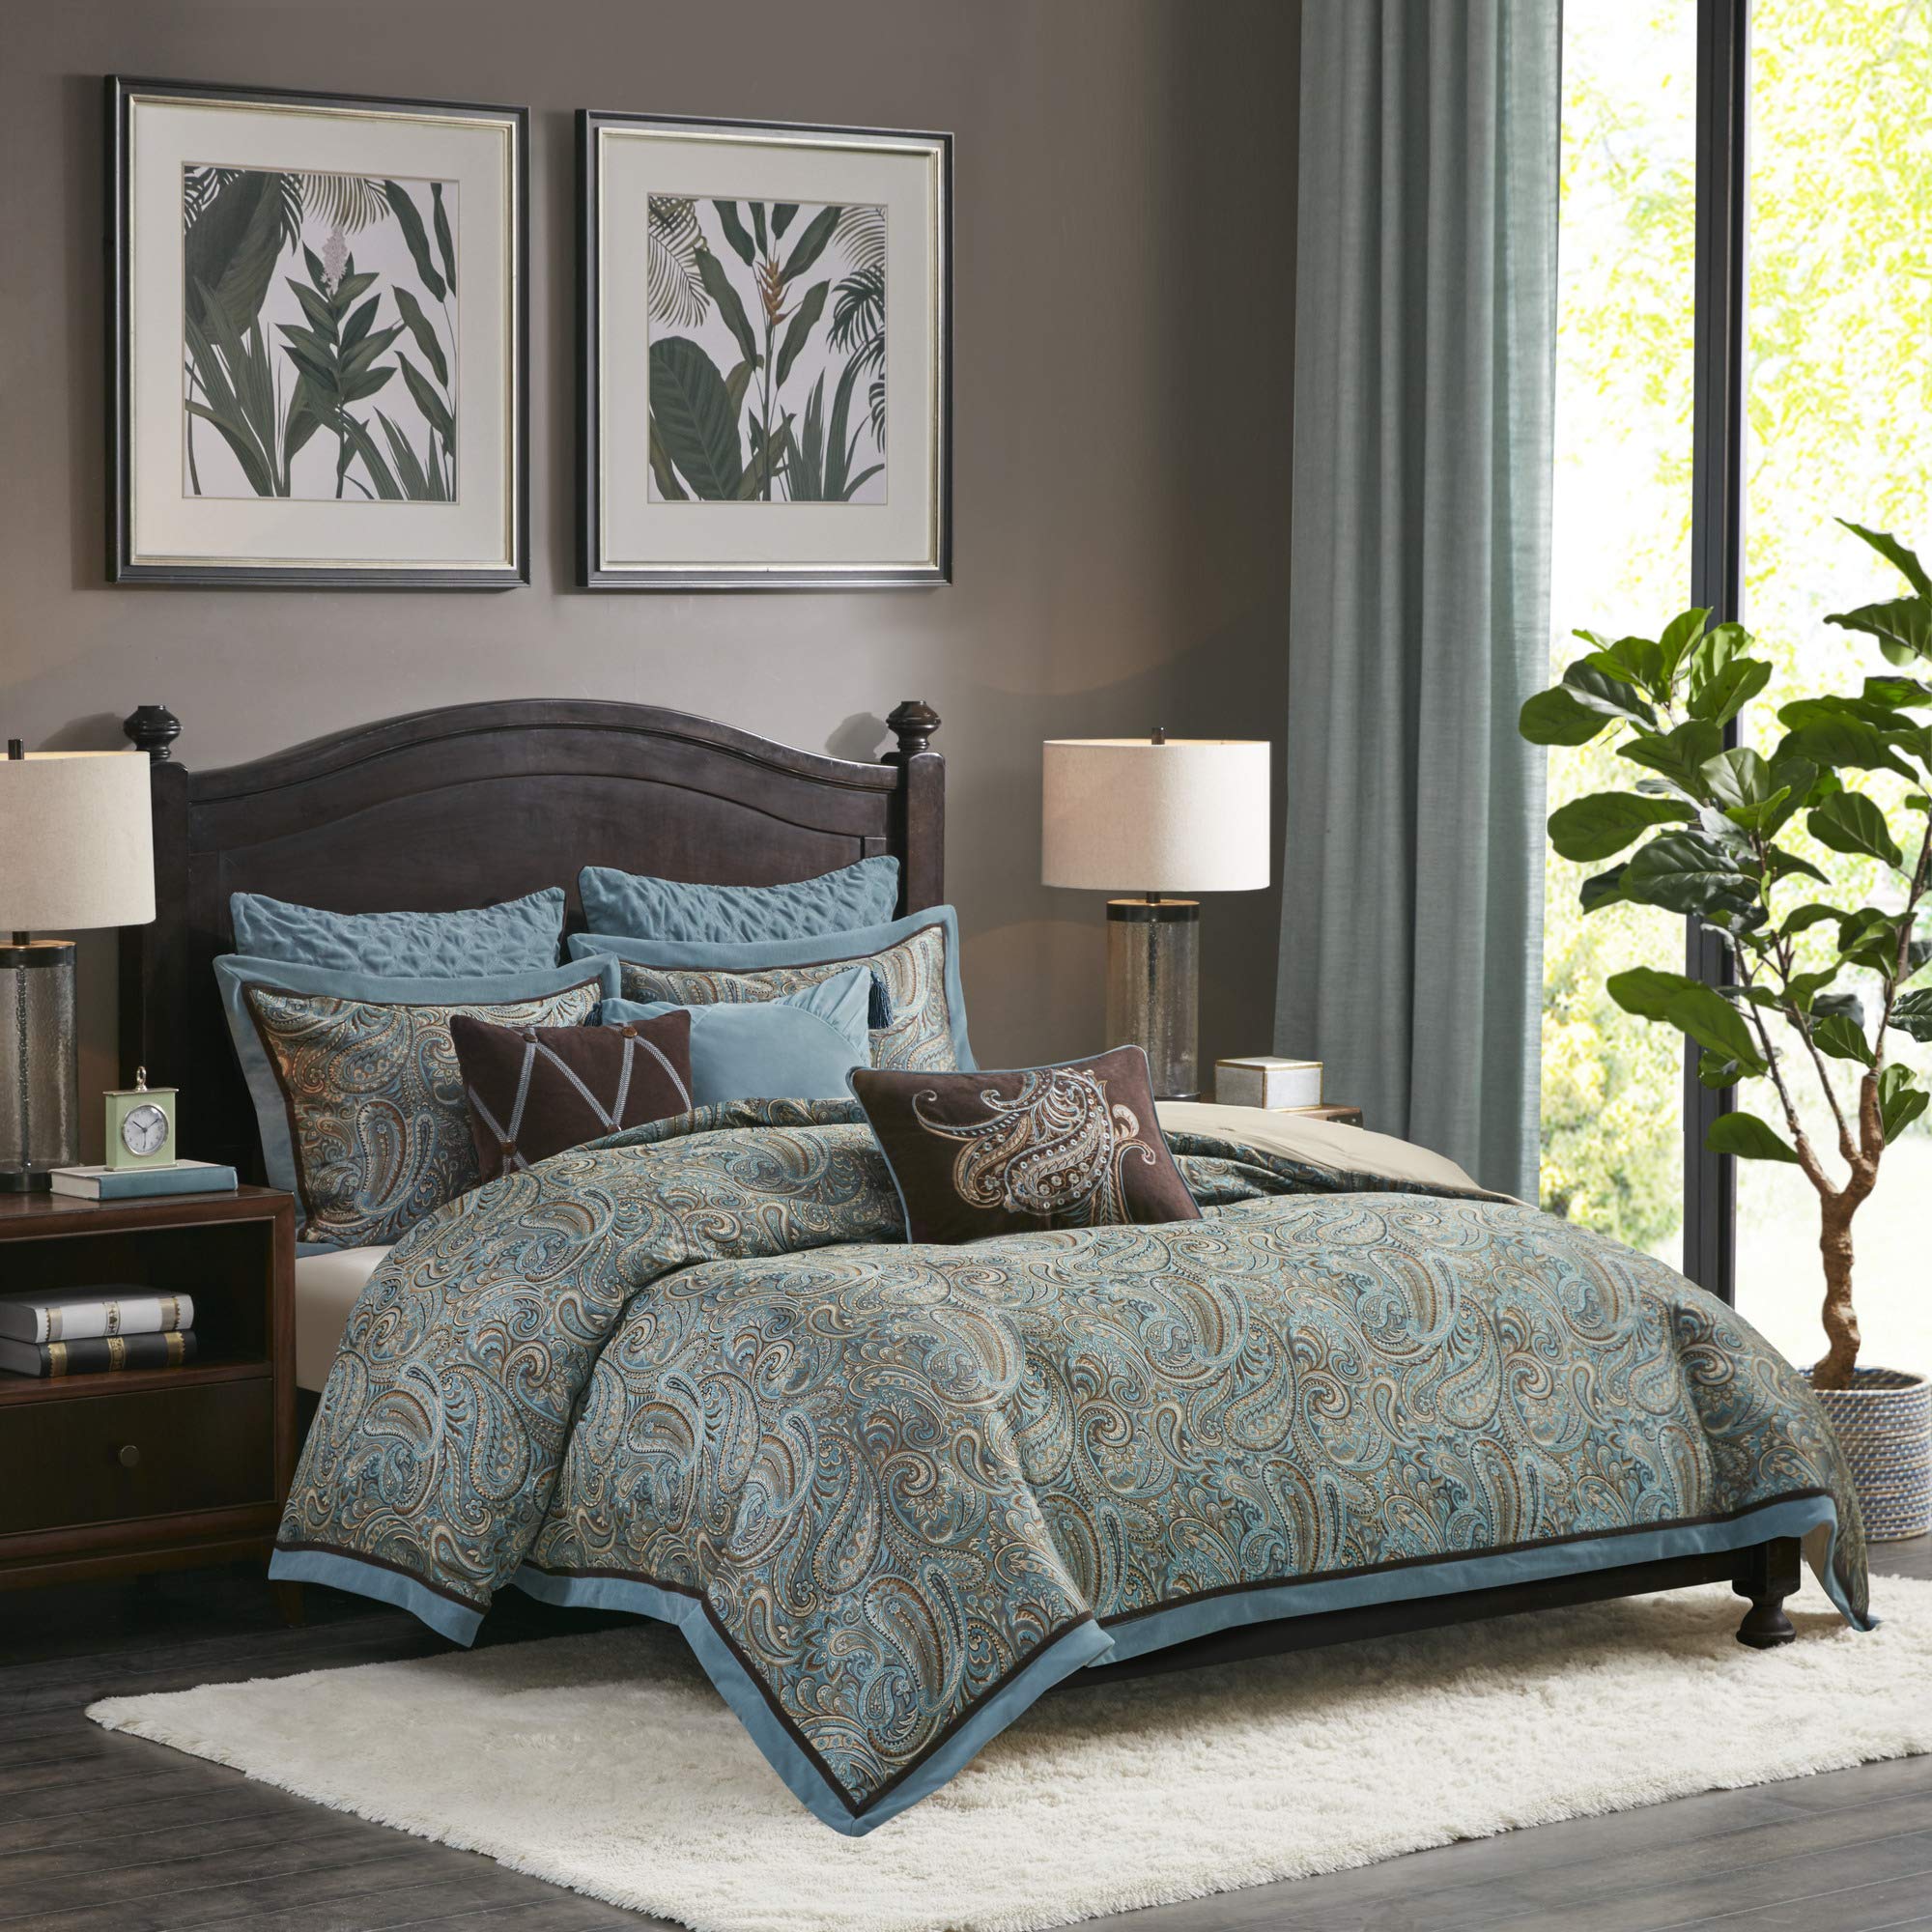 Hampton Hill Lauren King Size Bed Comforter Duvet 2-In-1 Set Bed In A Bag - Blue, Brown , Luxurious Jacquard Paisley - 9 Piece B